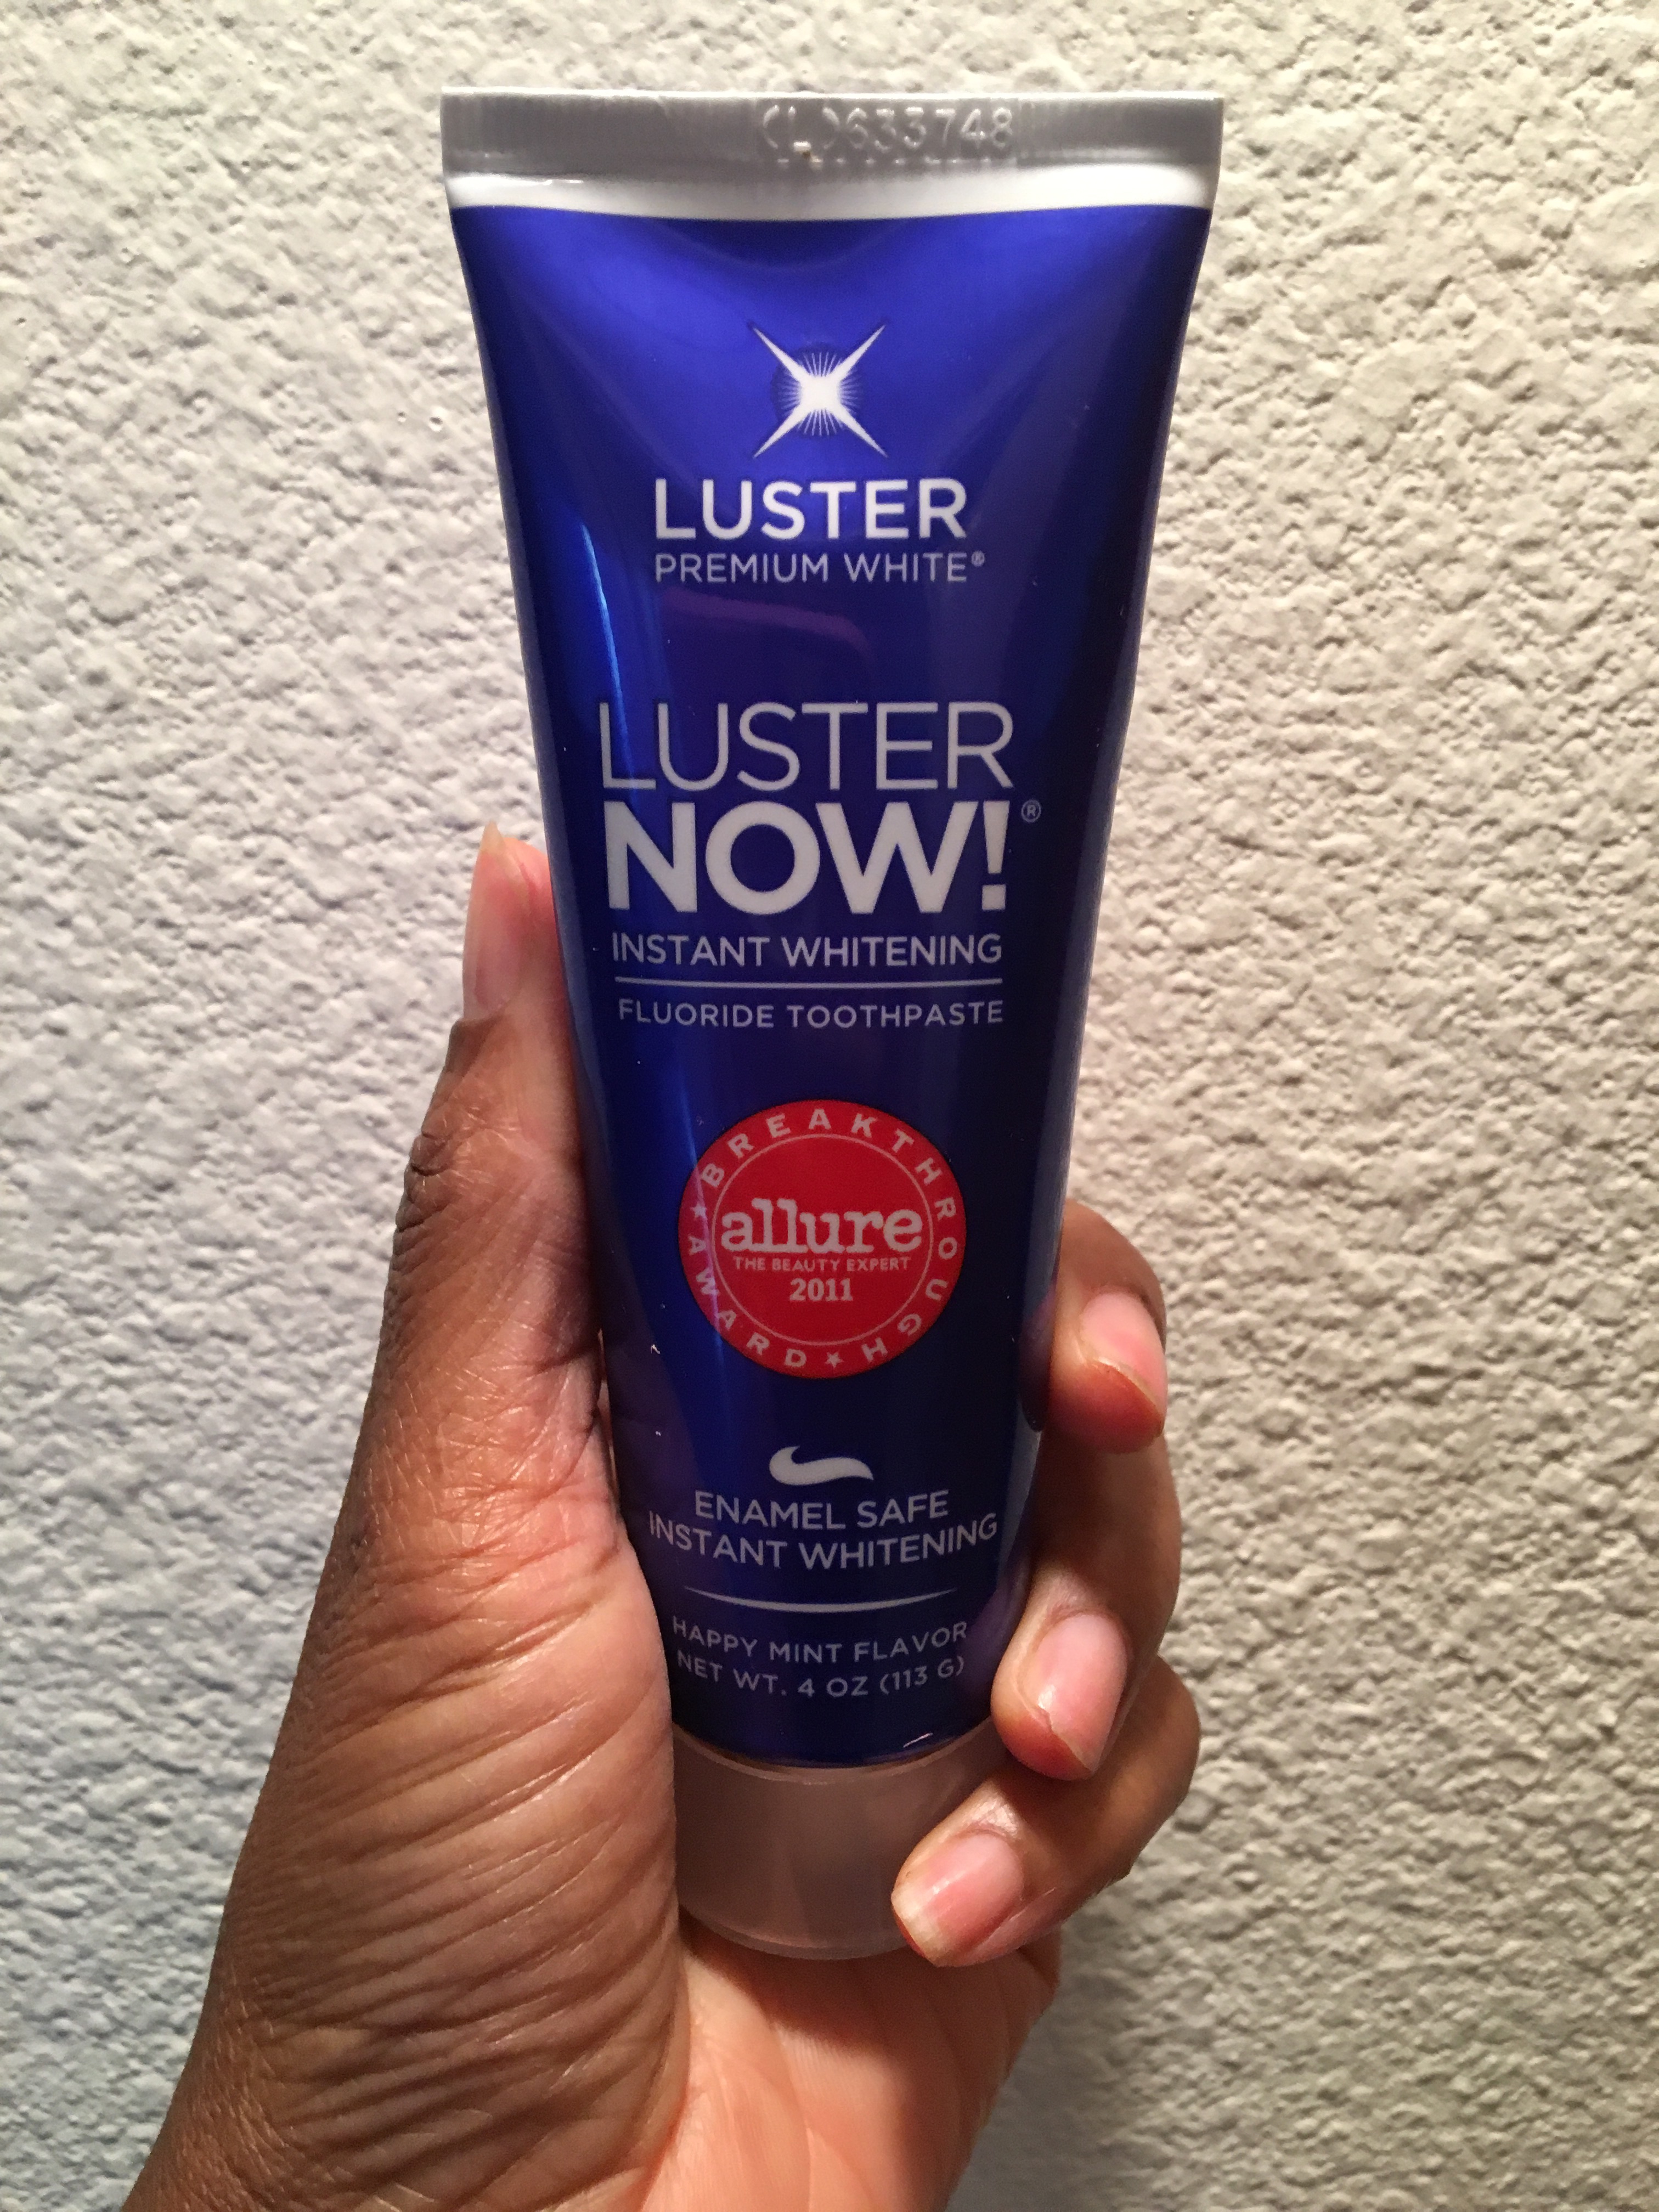 Luster Now & Luster Premium White – Recommended Toothpaste